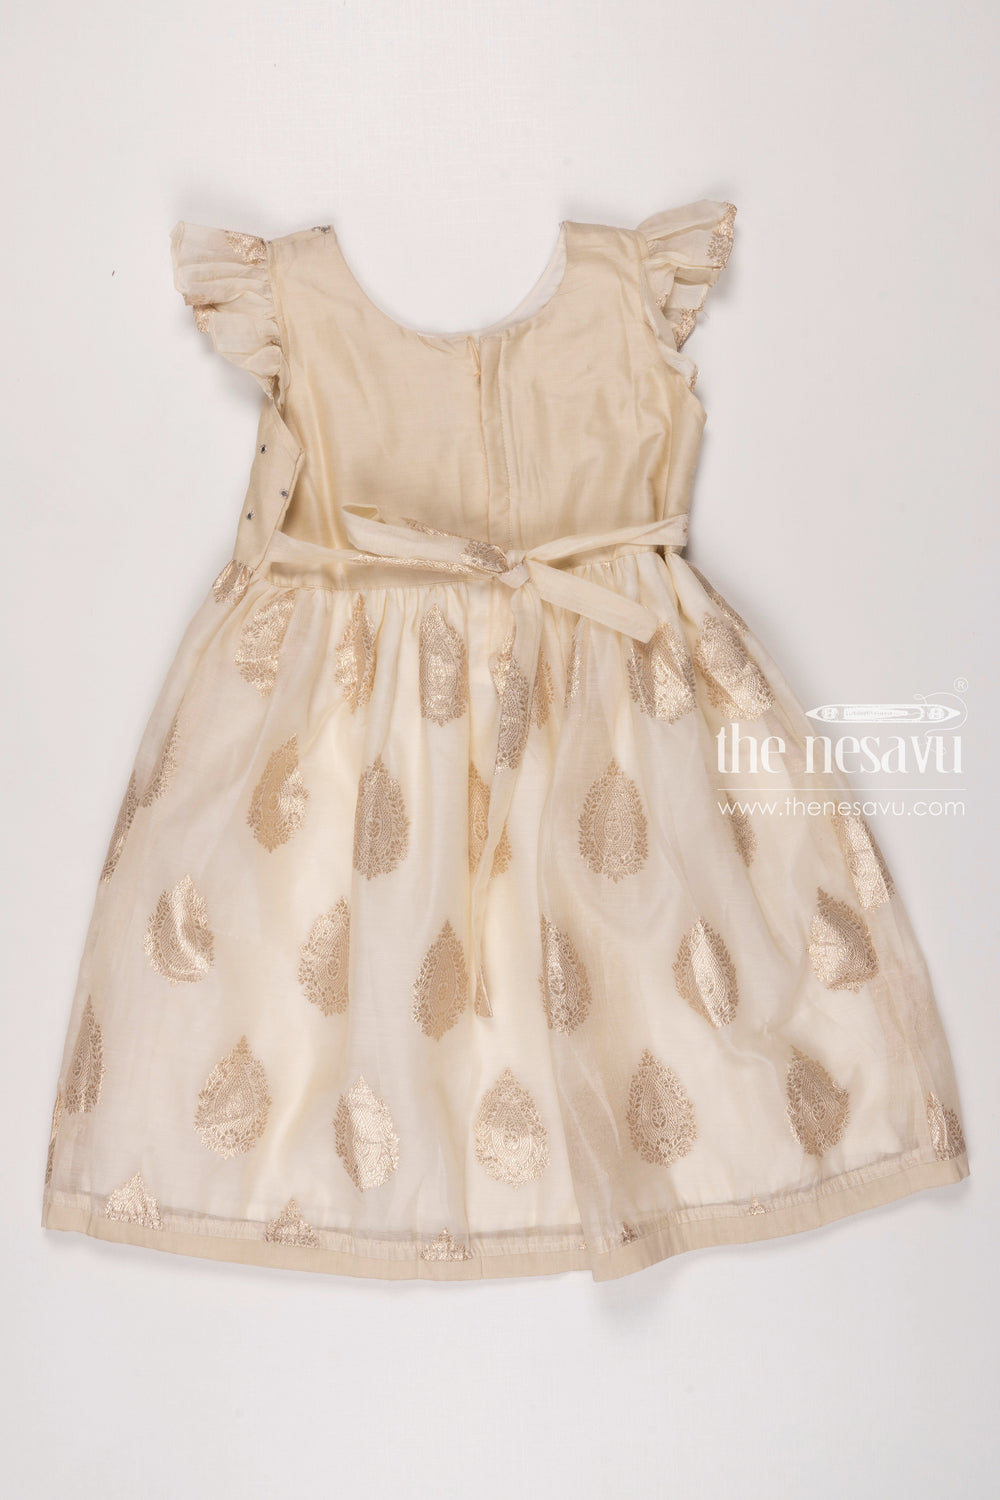 The Nesavu Girls Cotton Frock Elegant Cream Girls Chanderi Cotton Frock - Perfect for Special Occasions Nesavu Elegant Cream Girls Chanderi Cotton Frock | Perfect for Special Occasions | The Nesavu